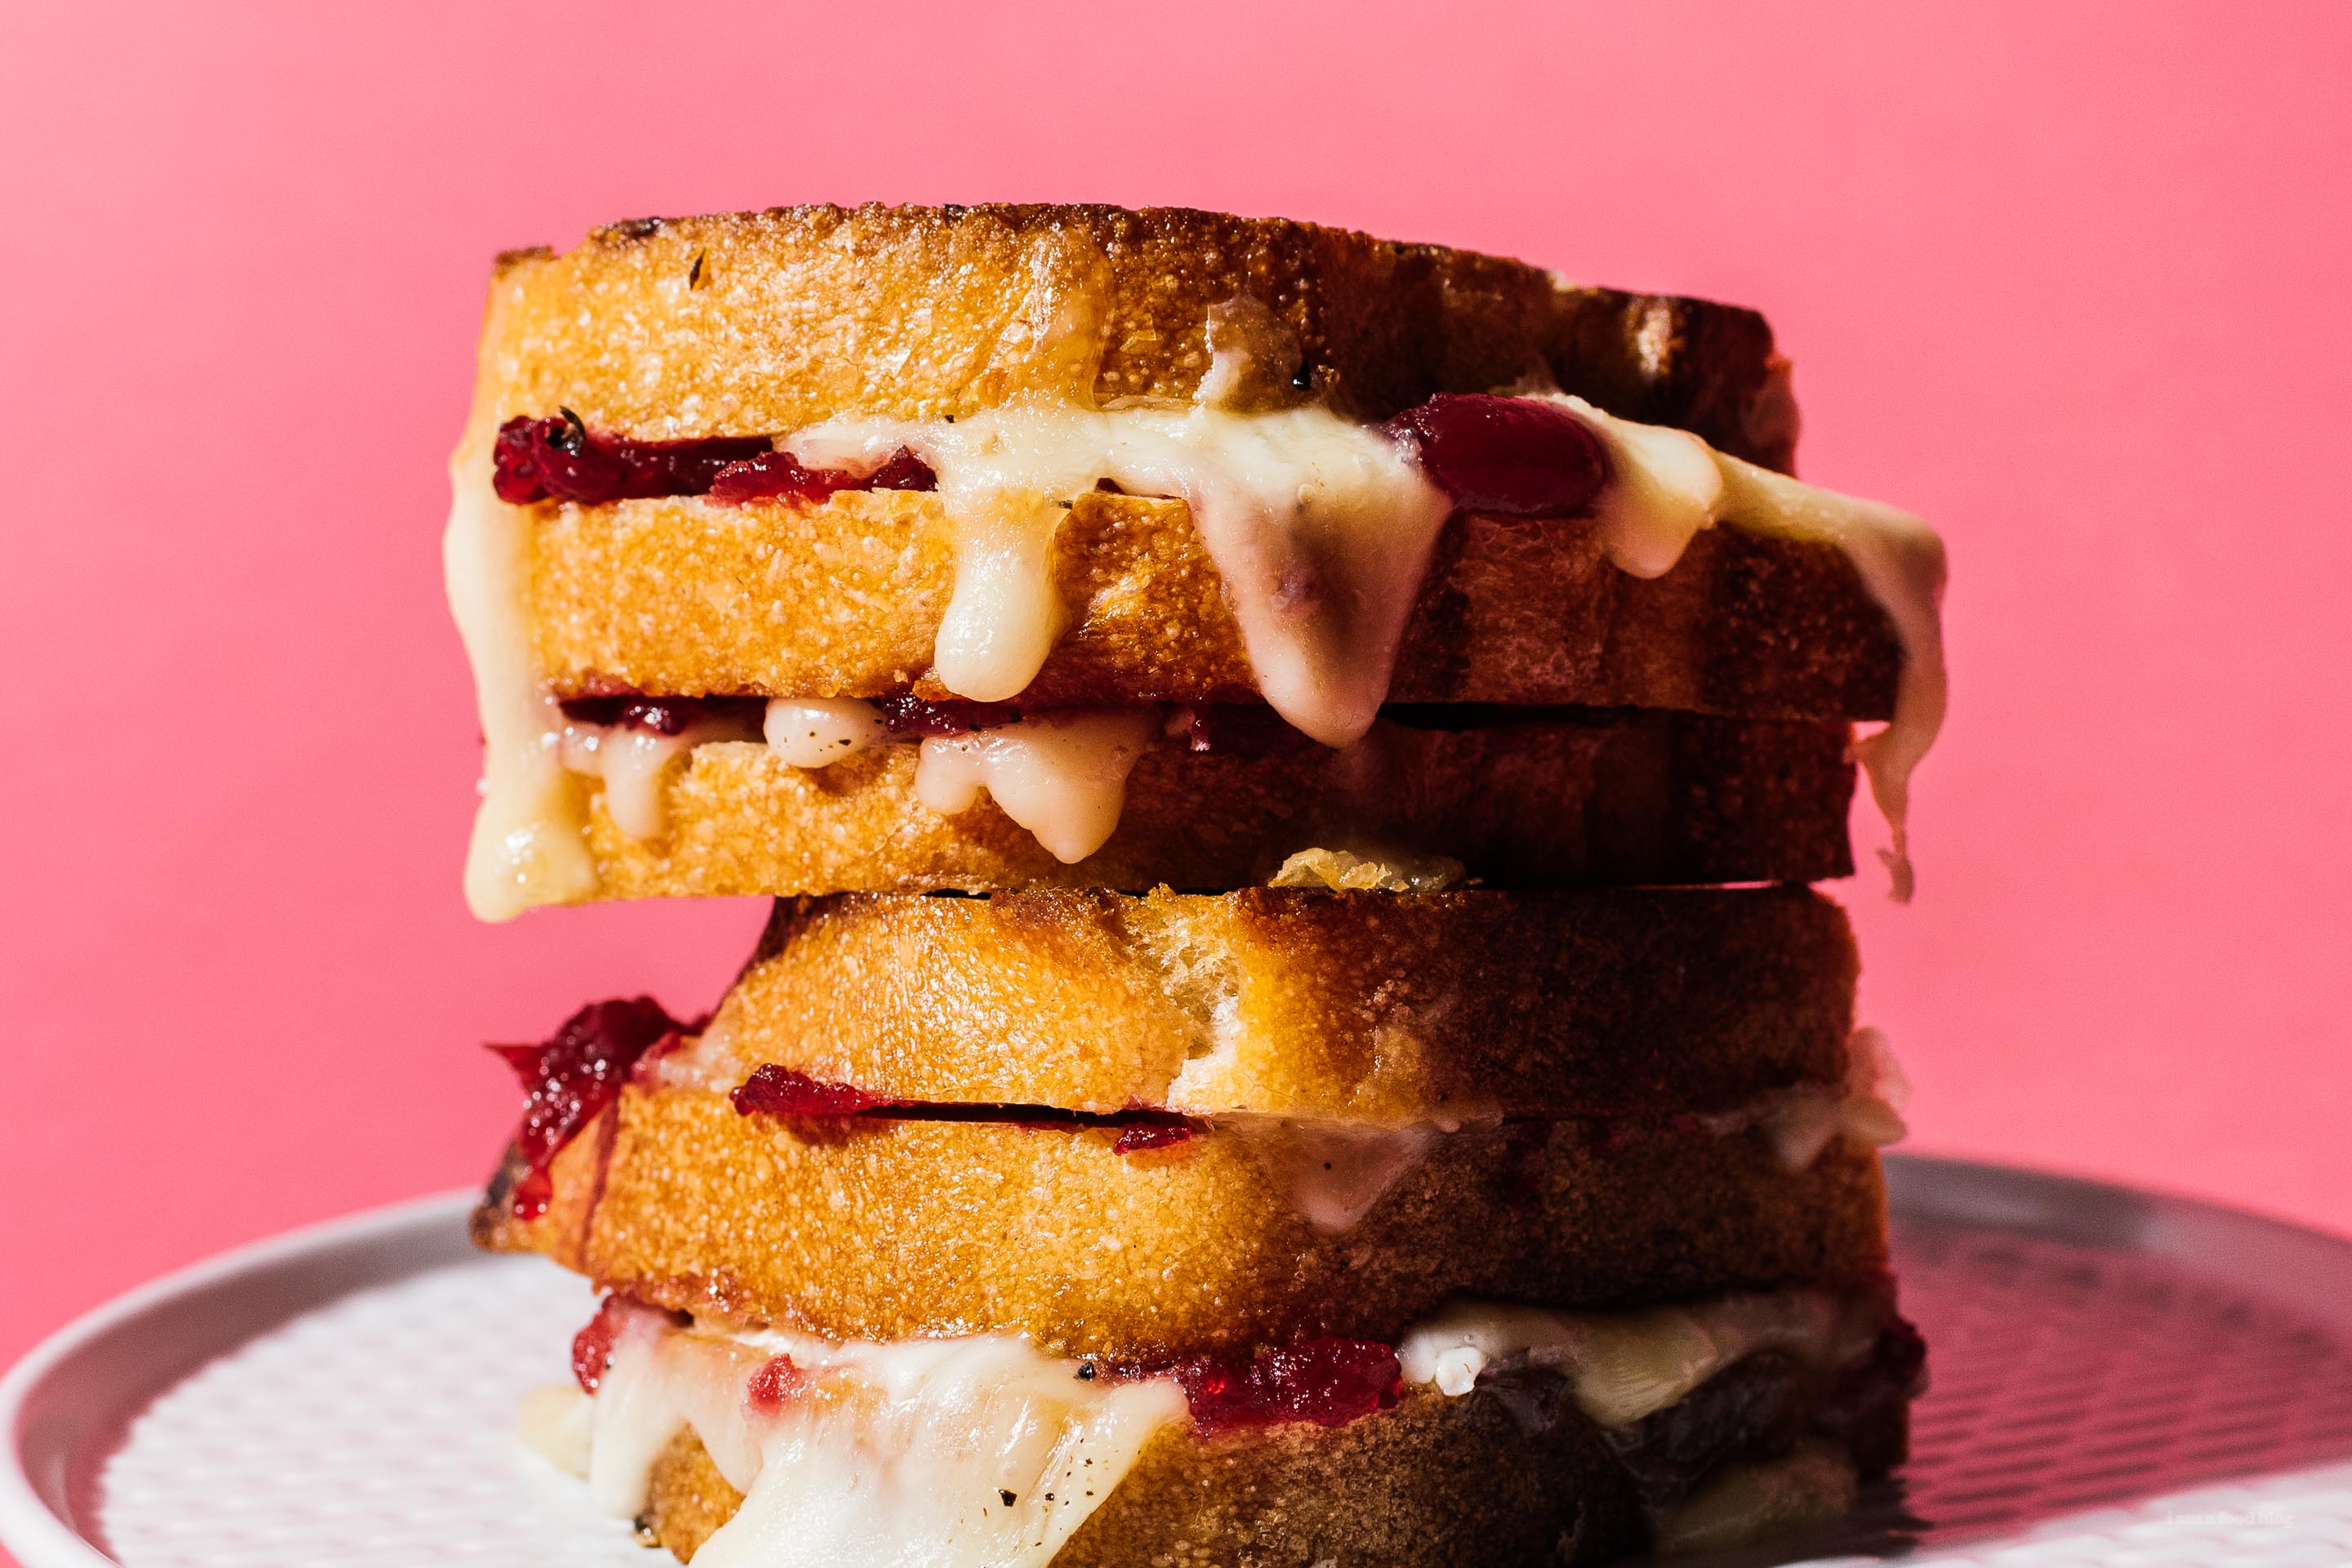 The Cran-brie: Cranberry and Brie Grilled Cheese